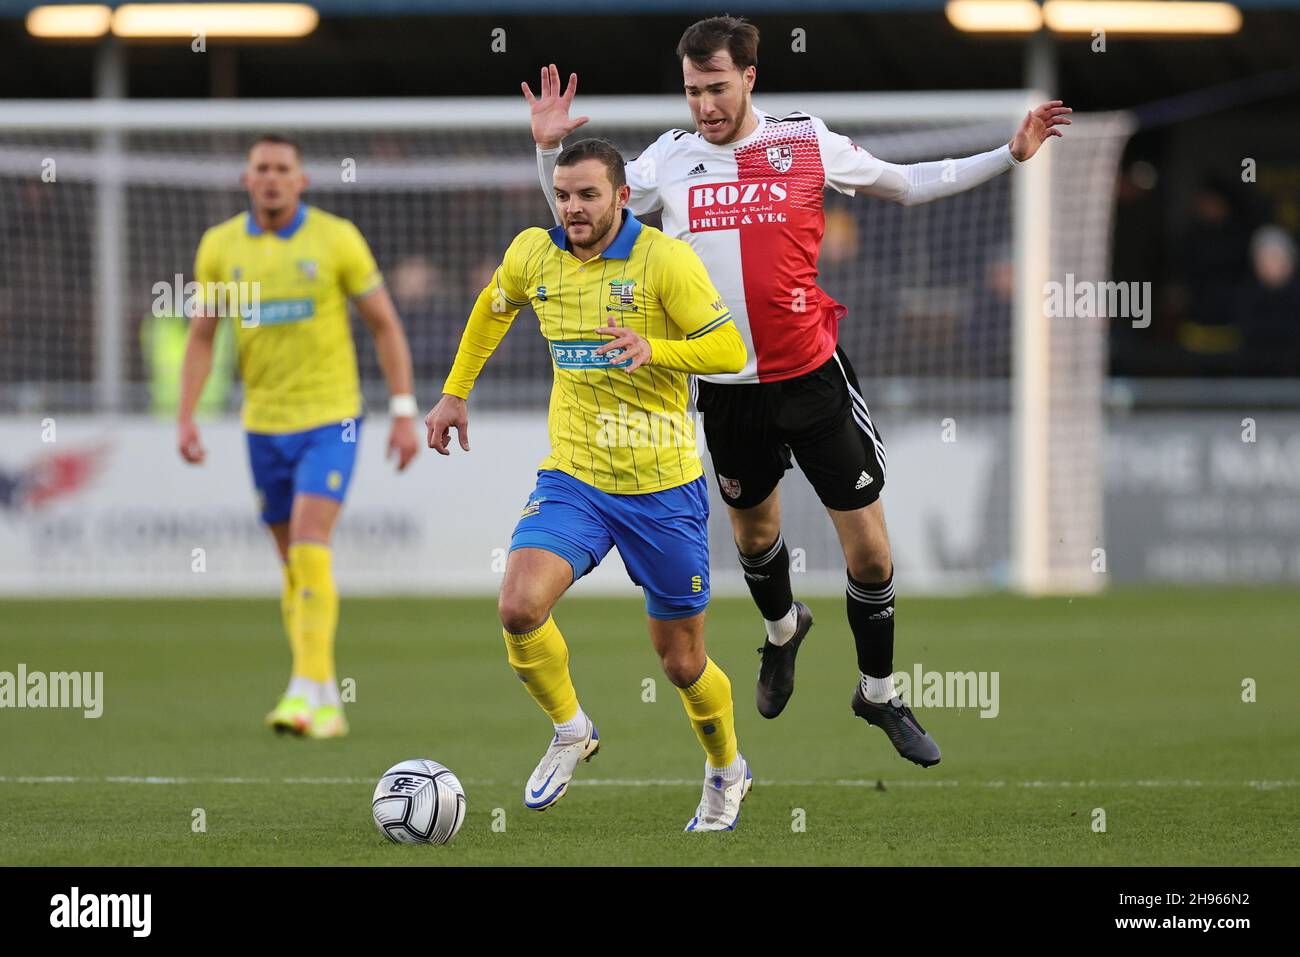 SOLIHULL, ENGLAND. DECEMBER 4TH 2021. Jamey Osborne of Solihull Moors runs with the ball during the Vanarama National League match between Solihull Moors and Woking FC at the Armco Stadium, Solihull on Saturday 4th December 2021. (Credit: James Holyoak/Alamy Live News) Stock Photo